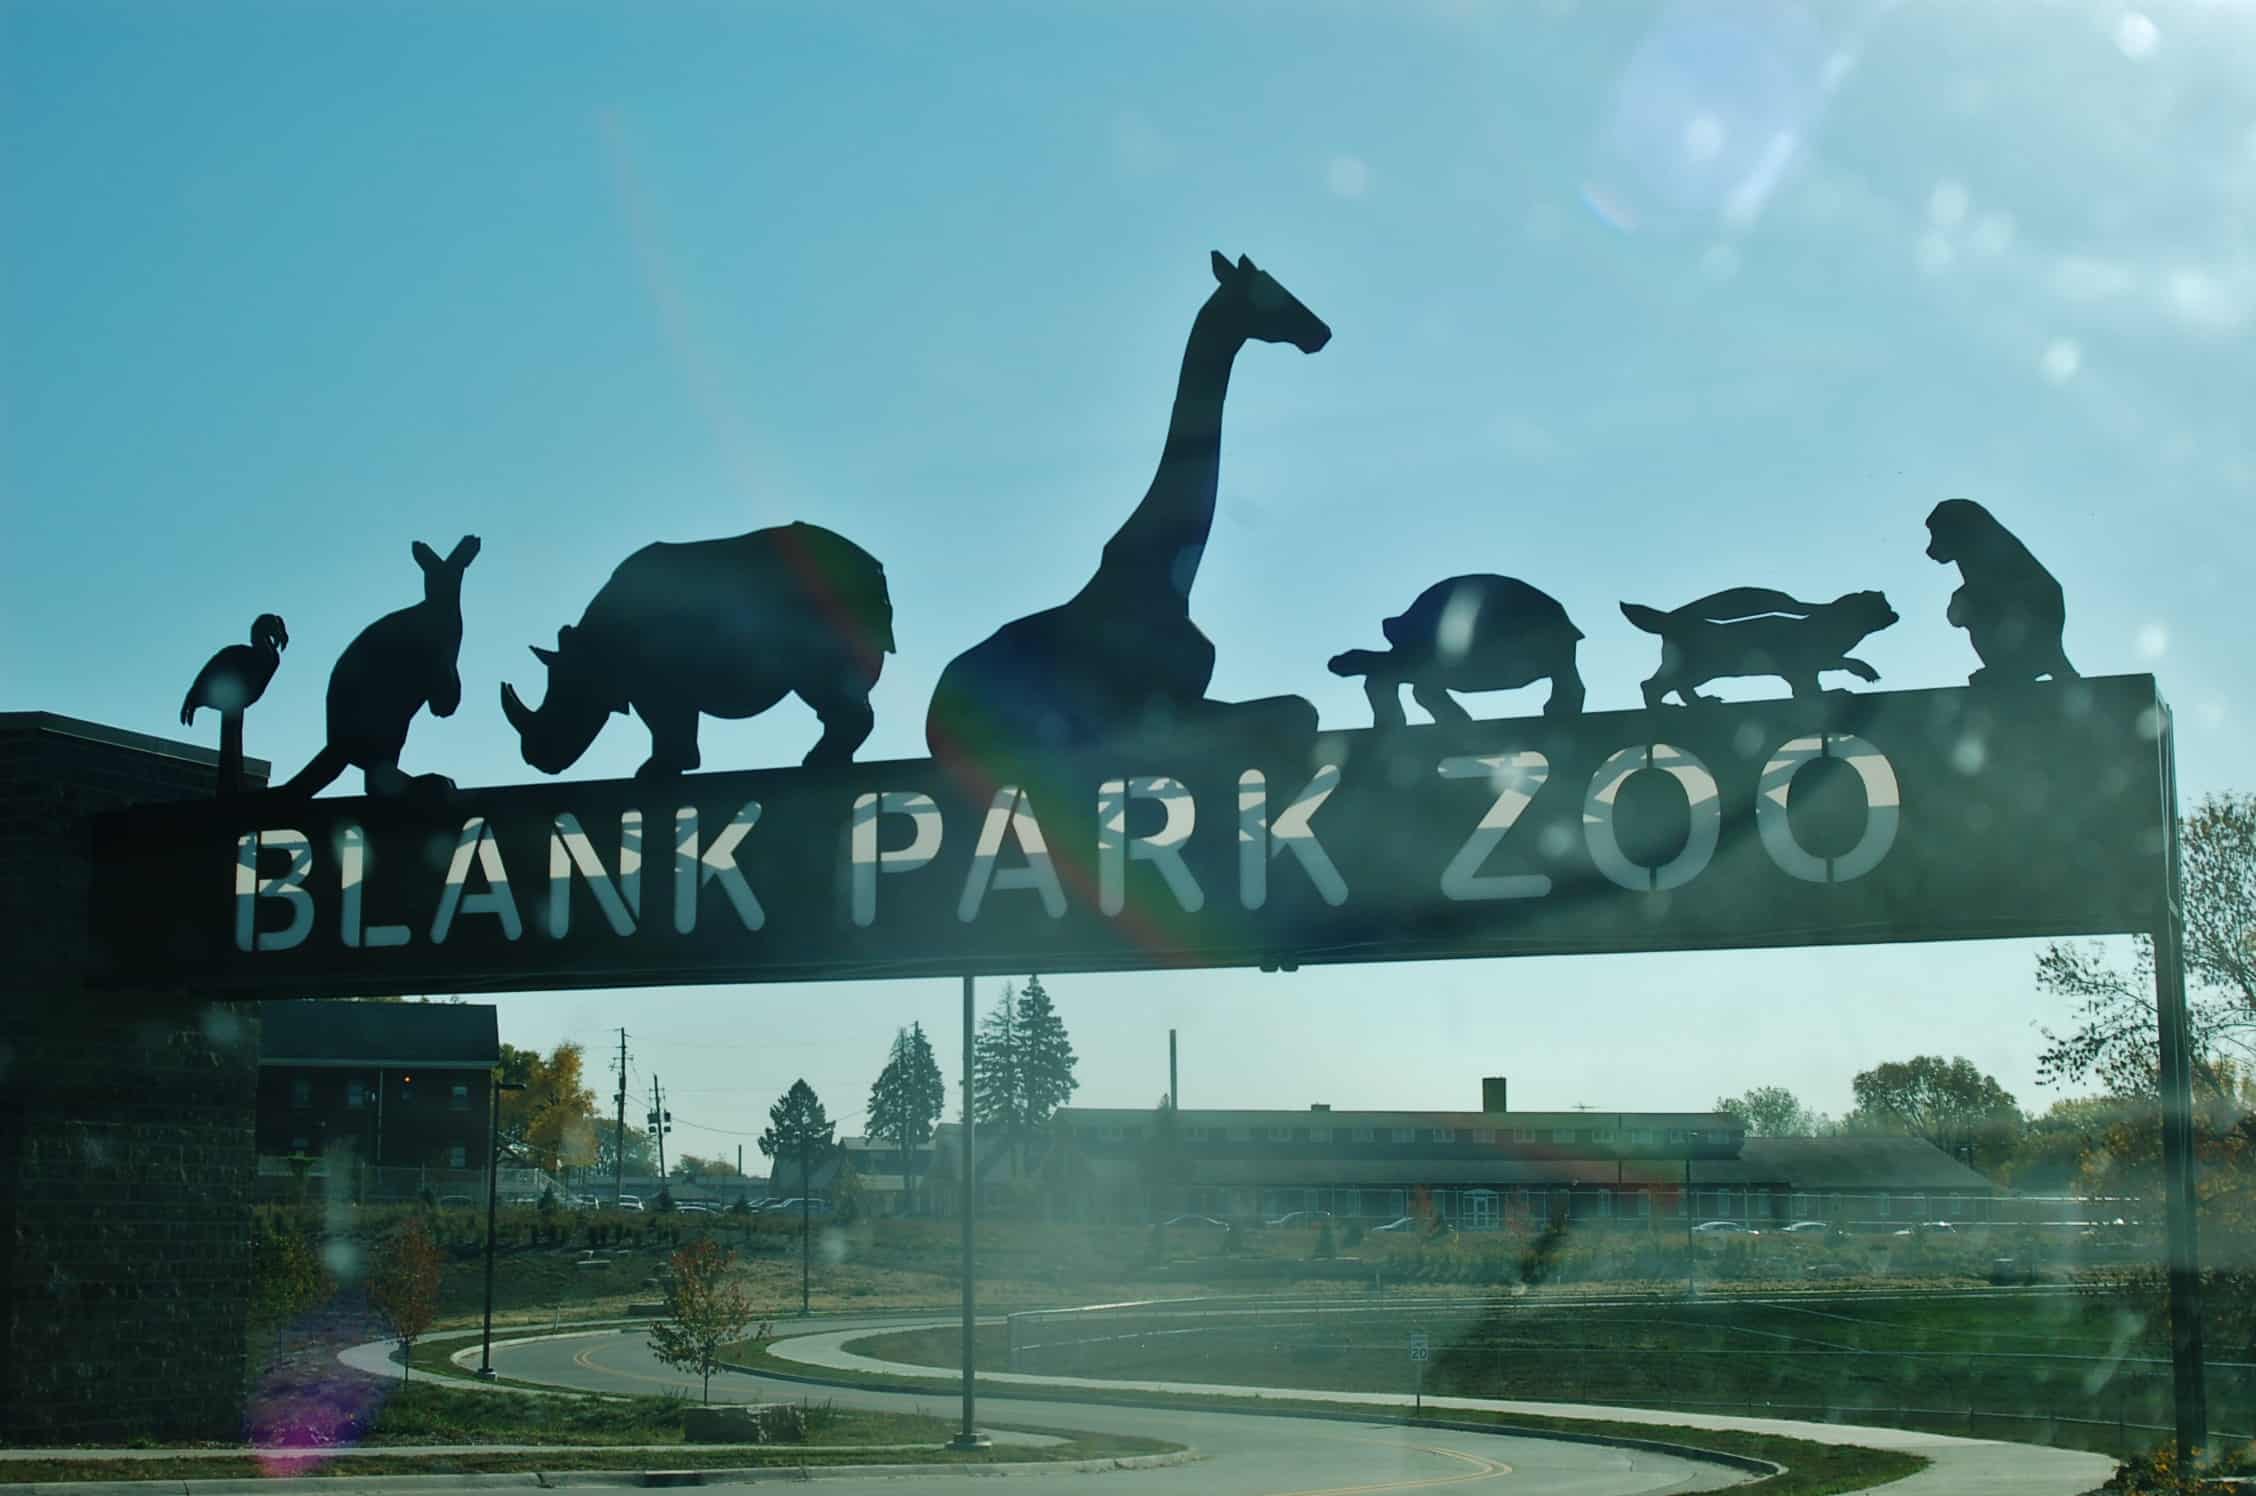 Visiting the Blank Park Zoo in Des Moines, Iowa